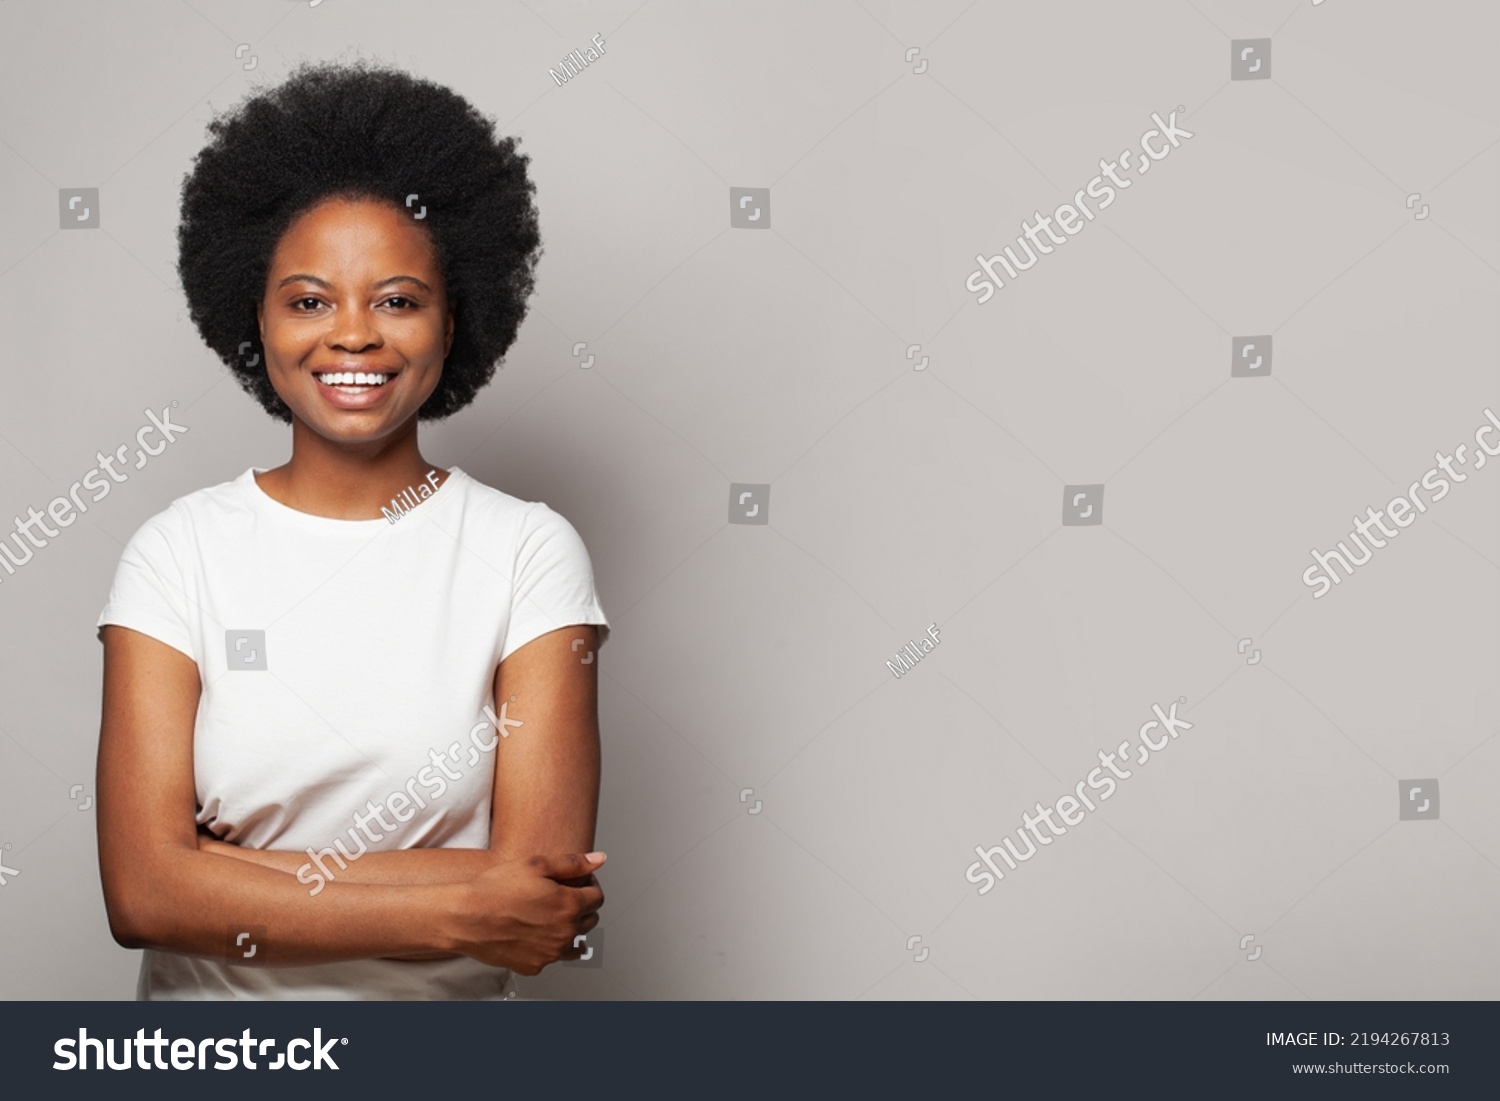 Happy smiling woman wearing white empty t-shirt standing on white background #2194267813